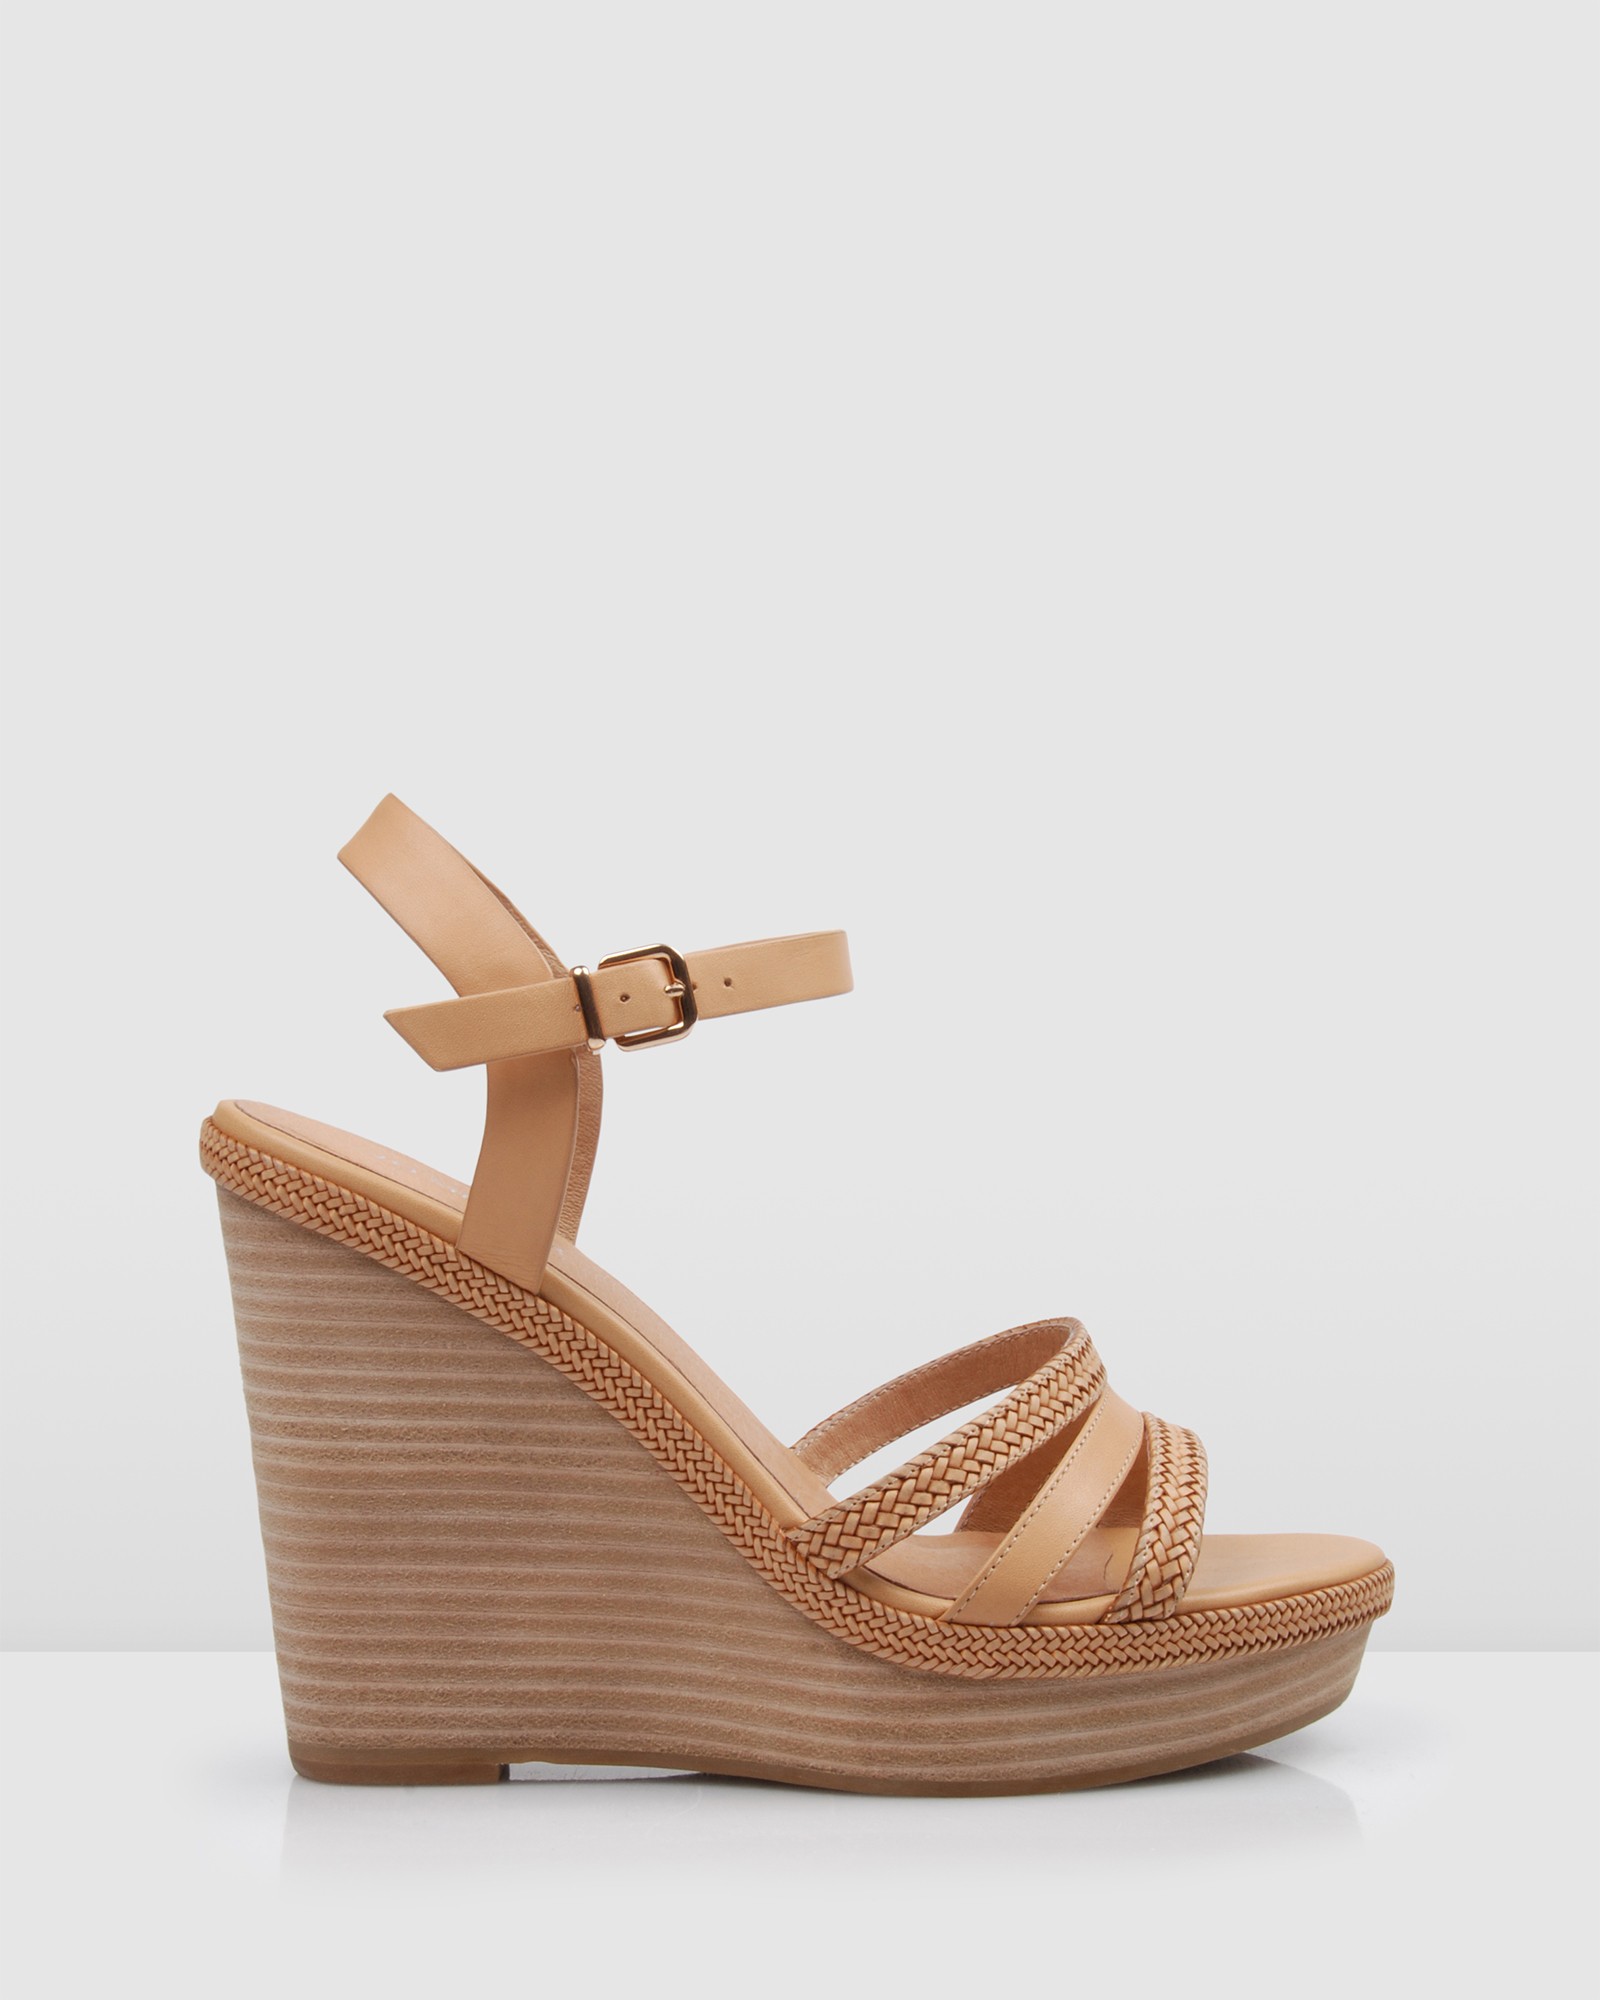 Allegra Wedge Sandals Tan Leather by Jo Mercer | ShoeSales